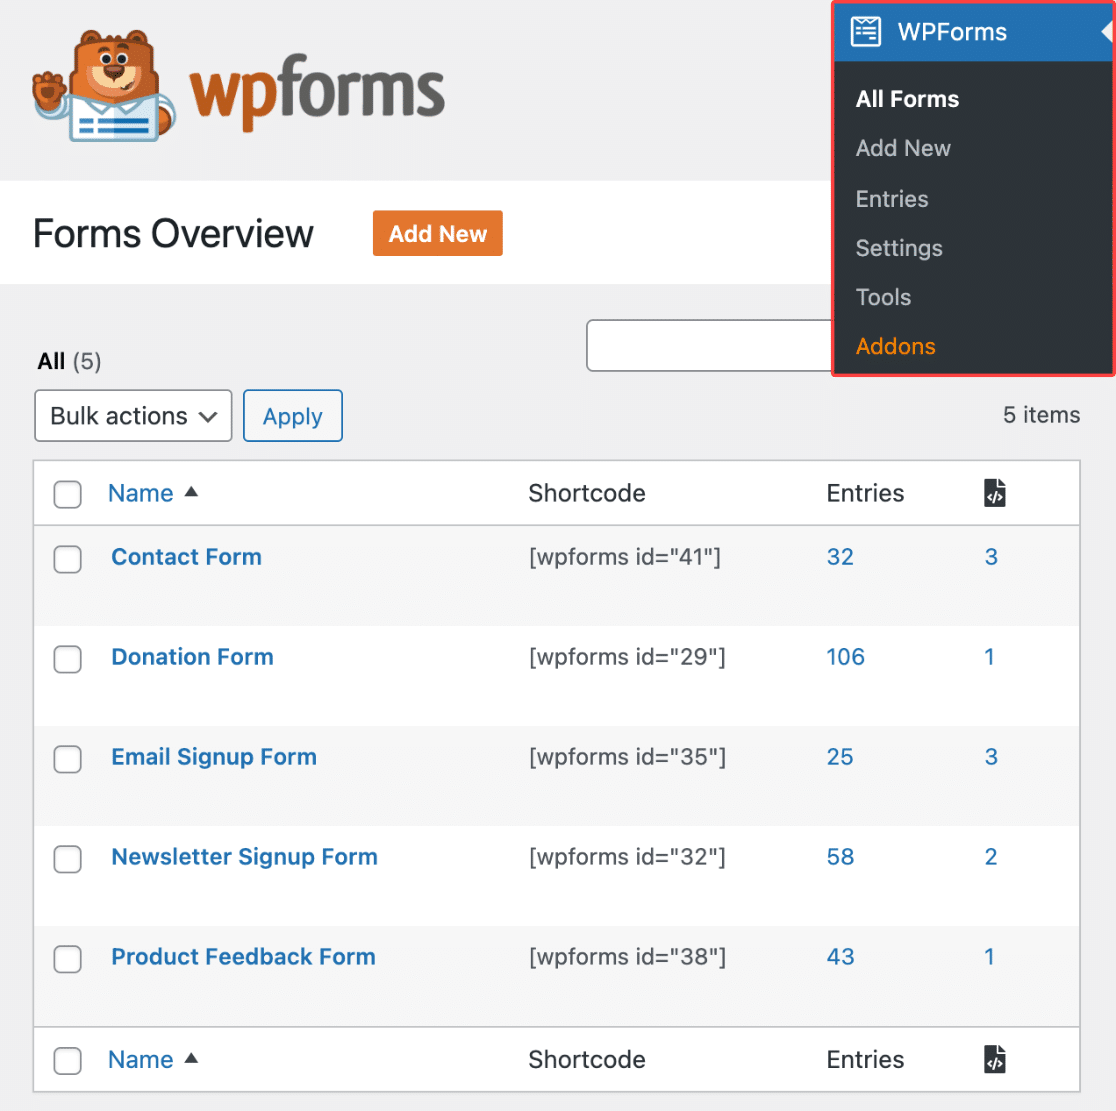 forms-overview-page